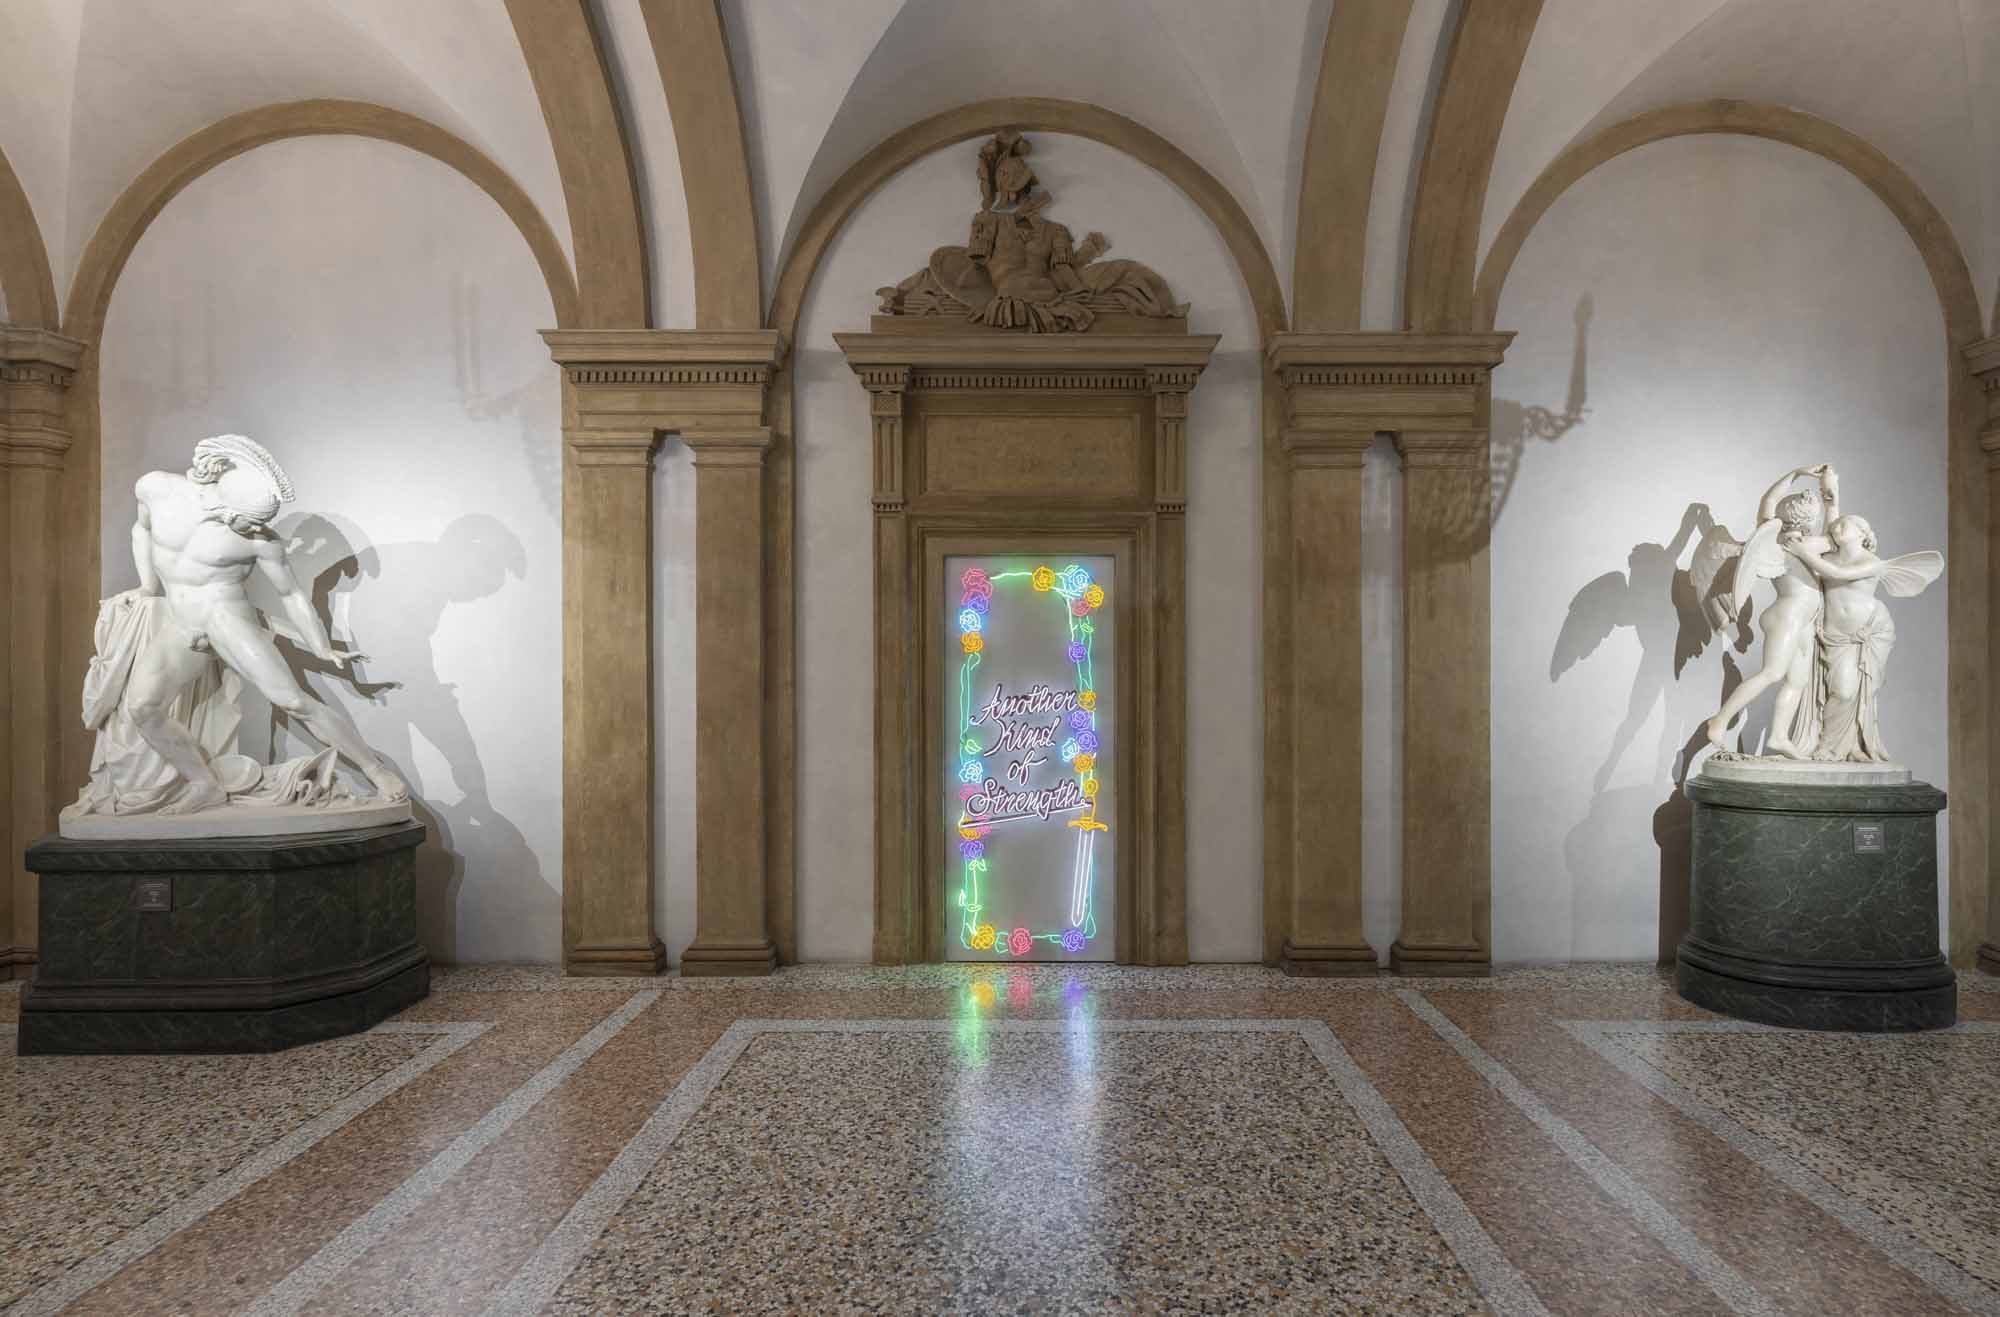 Andrea Bowers. Moving in Space without Asking Permission, 2022, installation view. Ph. Andrea Rossetti. Courtesy Fondazione Furla